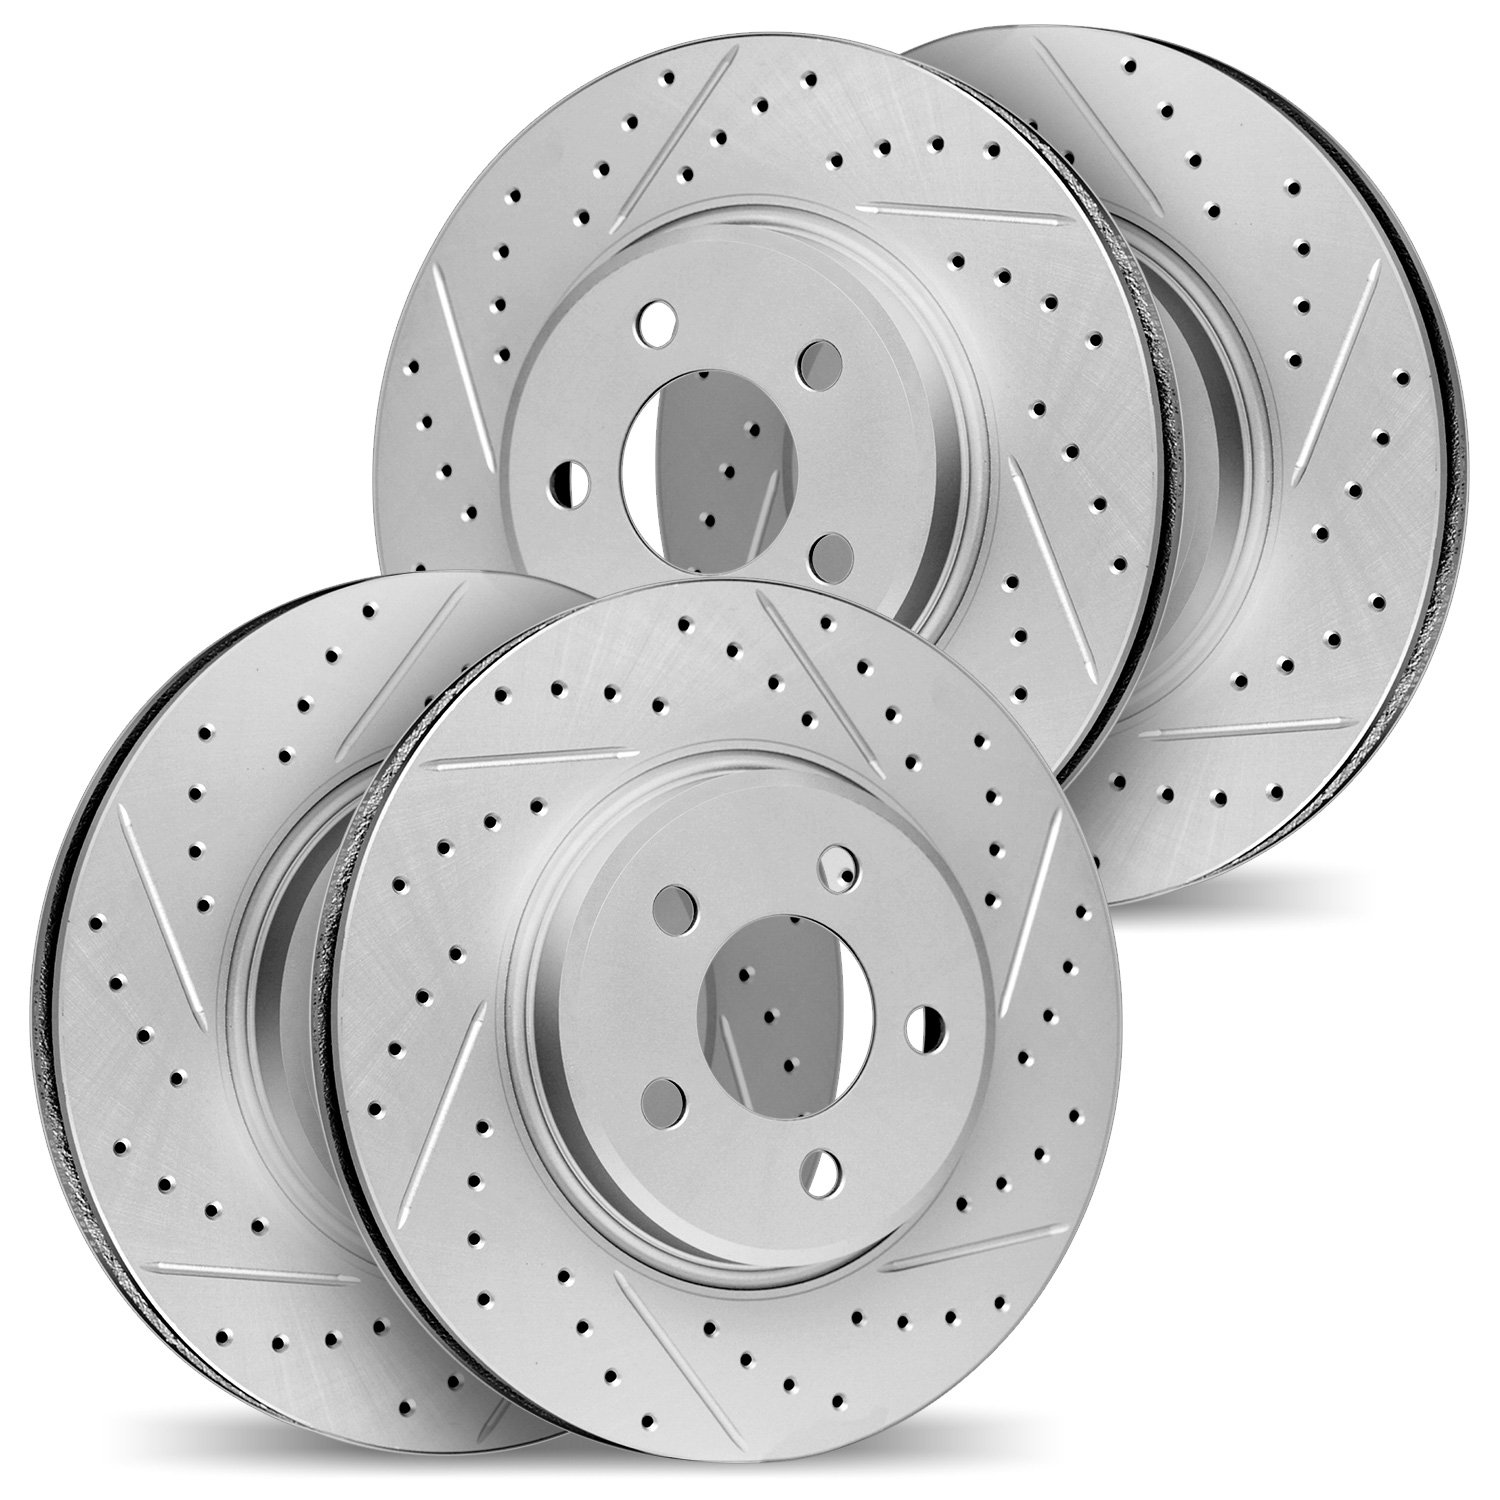 2004-31032 Geoperformance Drilled/Slotted Brake Rotors, 2006-2010 BMW, Position: Front and Rear